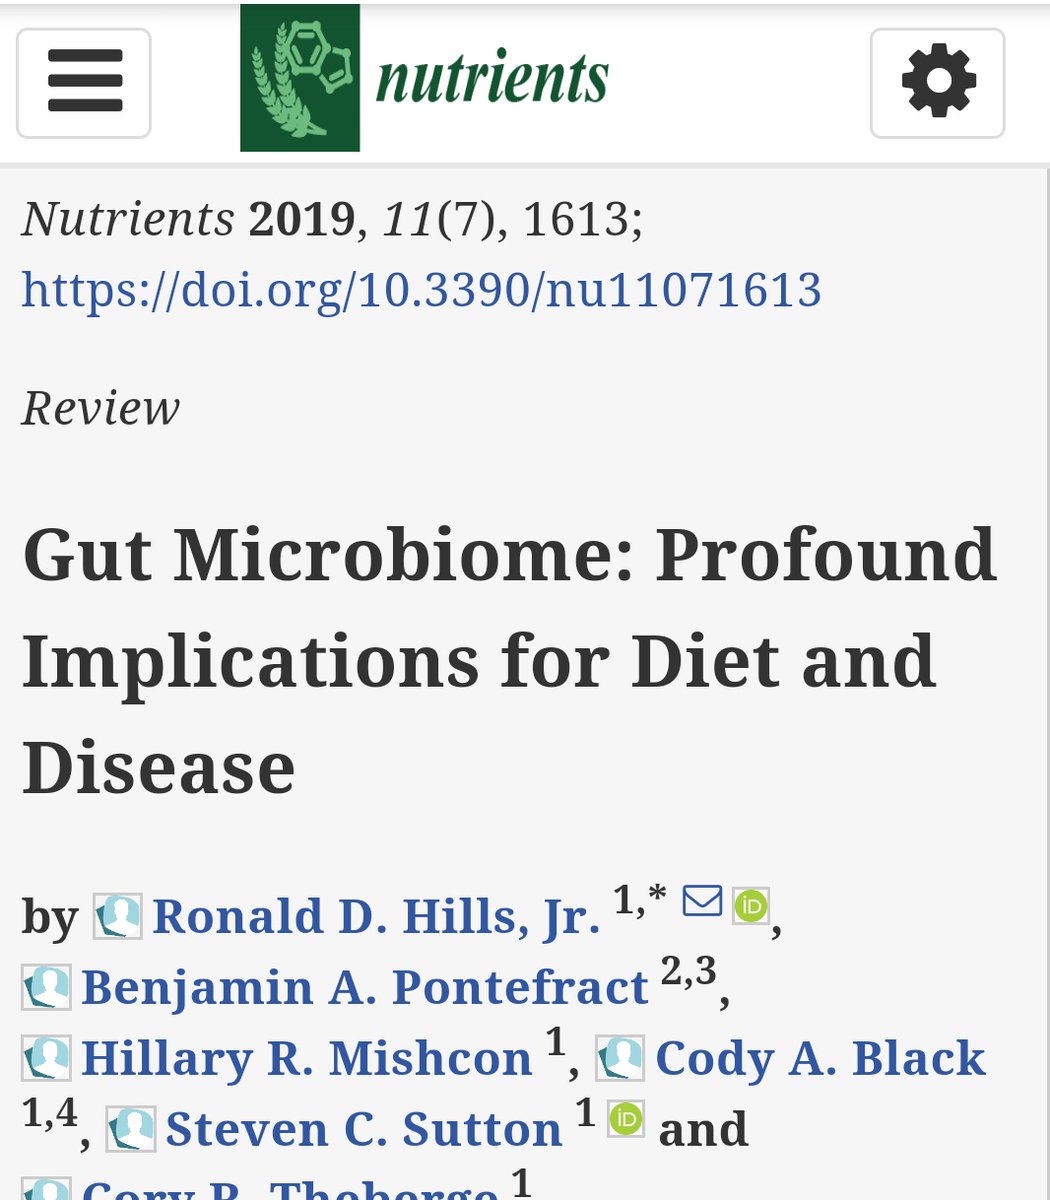 Hmm, the ketogenic diet makes improvements on the microbiome? How if, as the chubby nutritionist say, it's dangerously low in fiber? "Moreover, increased levels of the inhibitory neurotransmitter γ-aminobutyric acid (GABA) were detected..and observed to be microbiota-dependent."